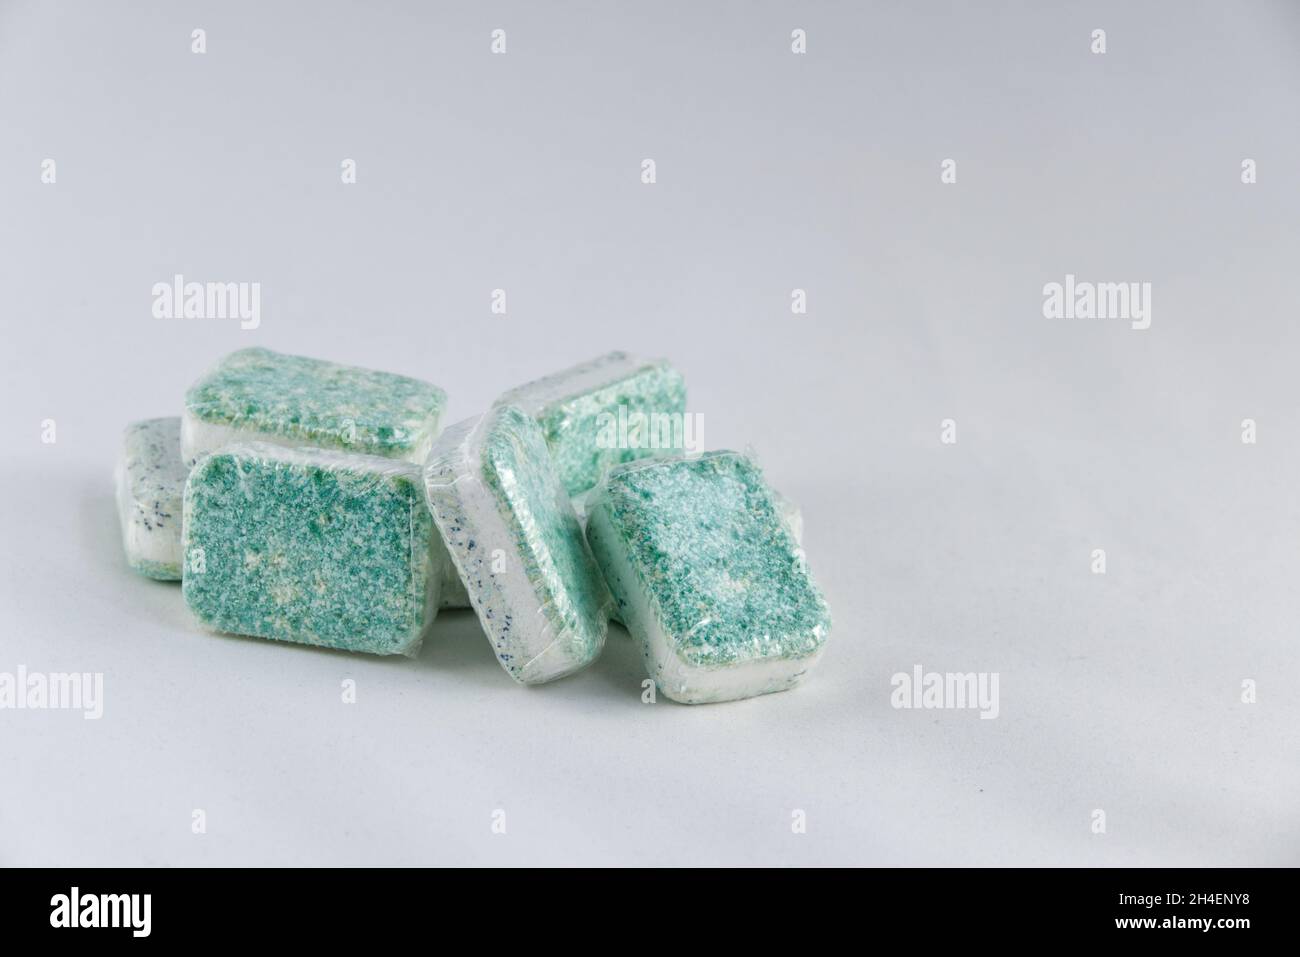 A heap of dishwasher tablets, colored green and white, stacked randomly against a white background. Generic brand, wrapped in soluble plastic. Stock Photo